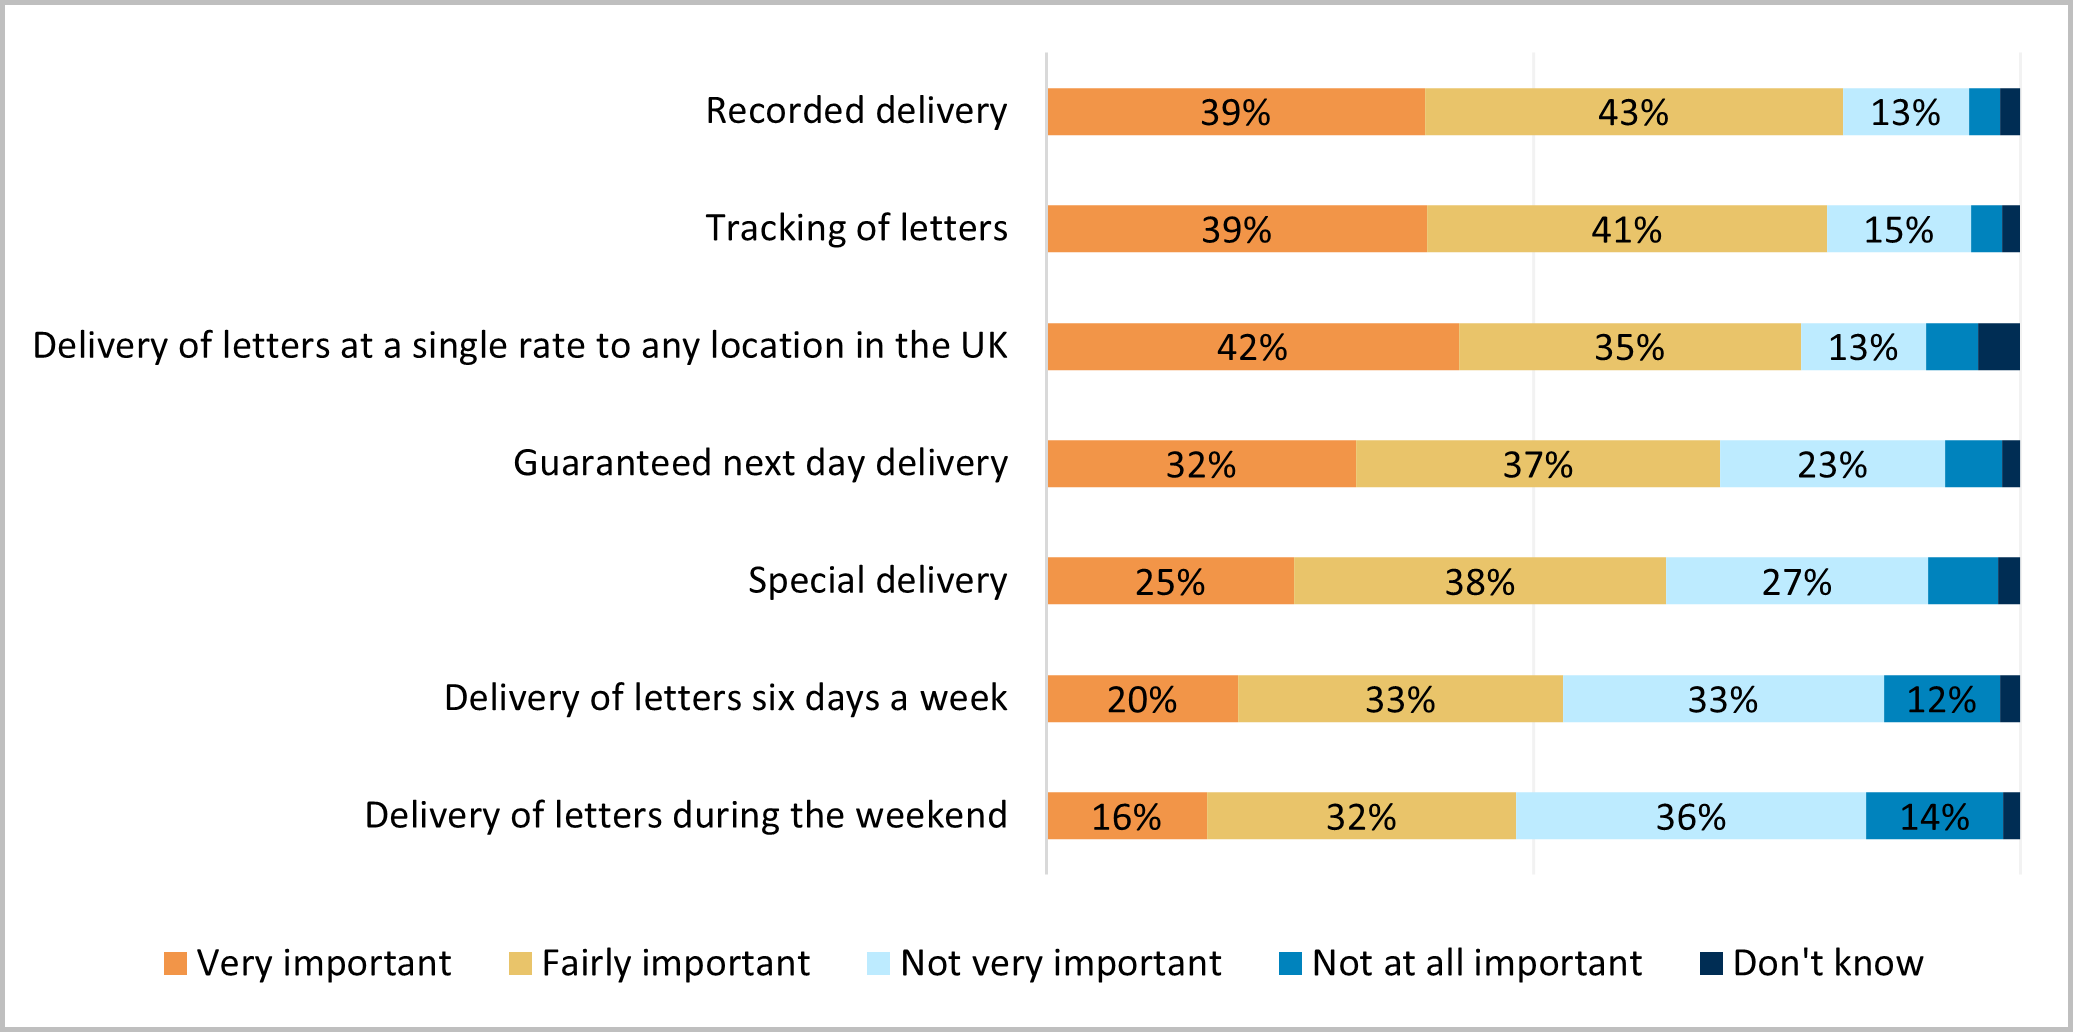 recorded delivery, tracking of letters and delivery at a single rate to any location in the UK are the three most important aspects for consumers. These were followed by guaranteed delivery, special delivery, with delivery of six days and weekend delivery rated as the least important aspects.